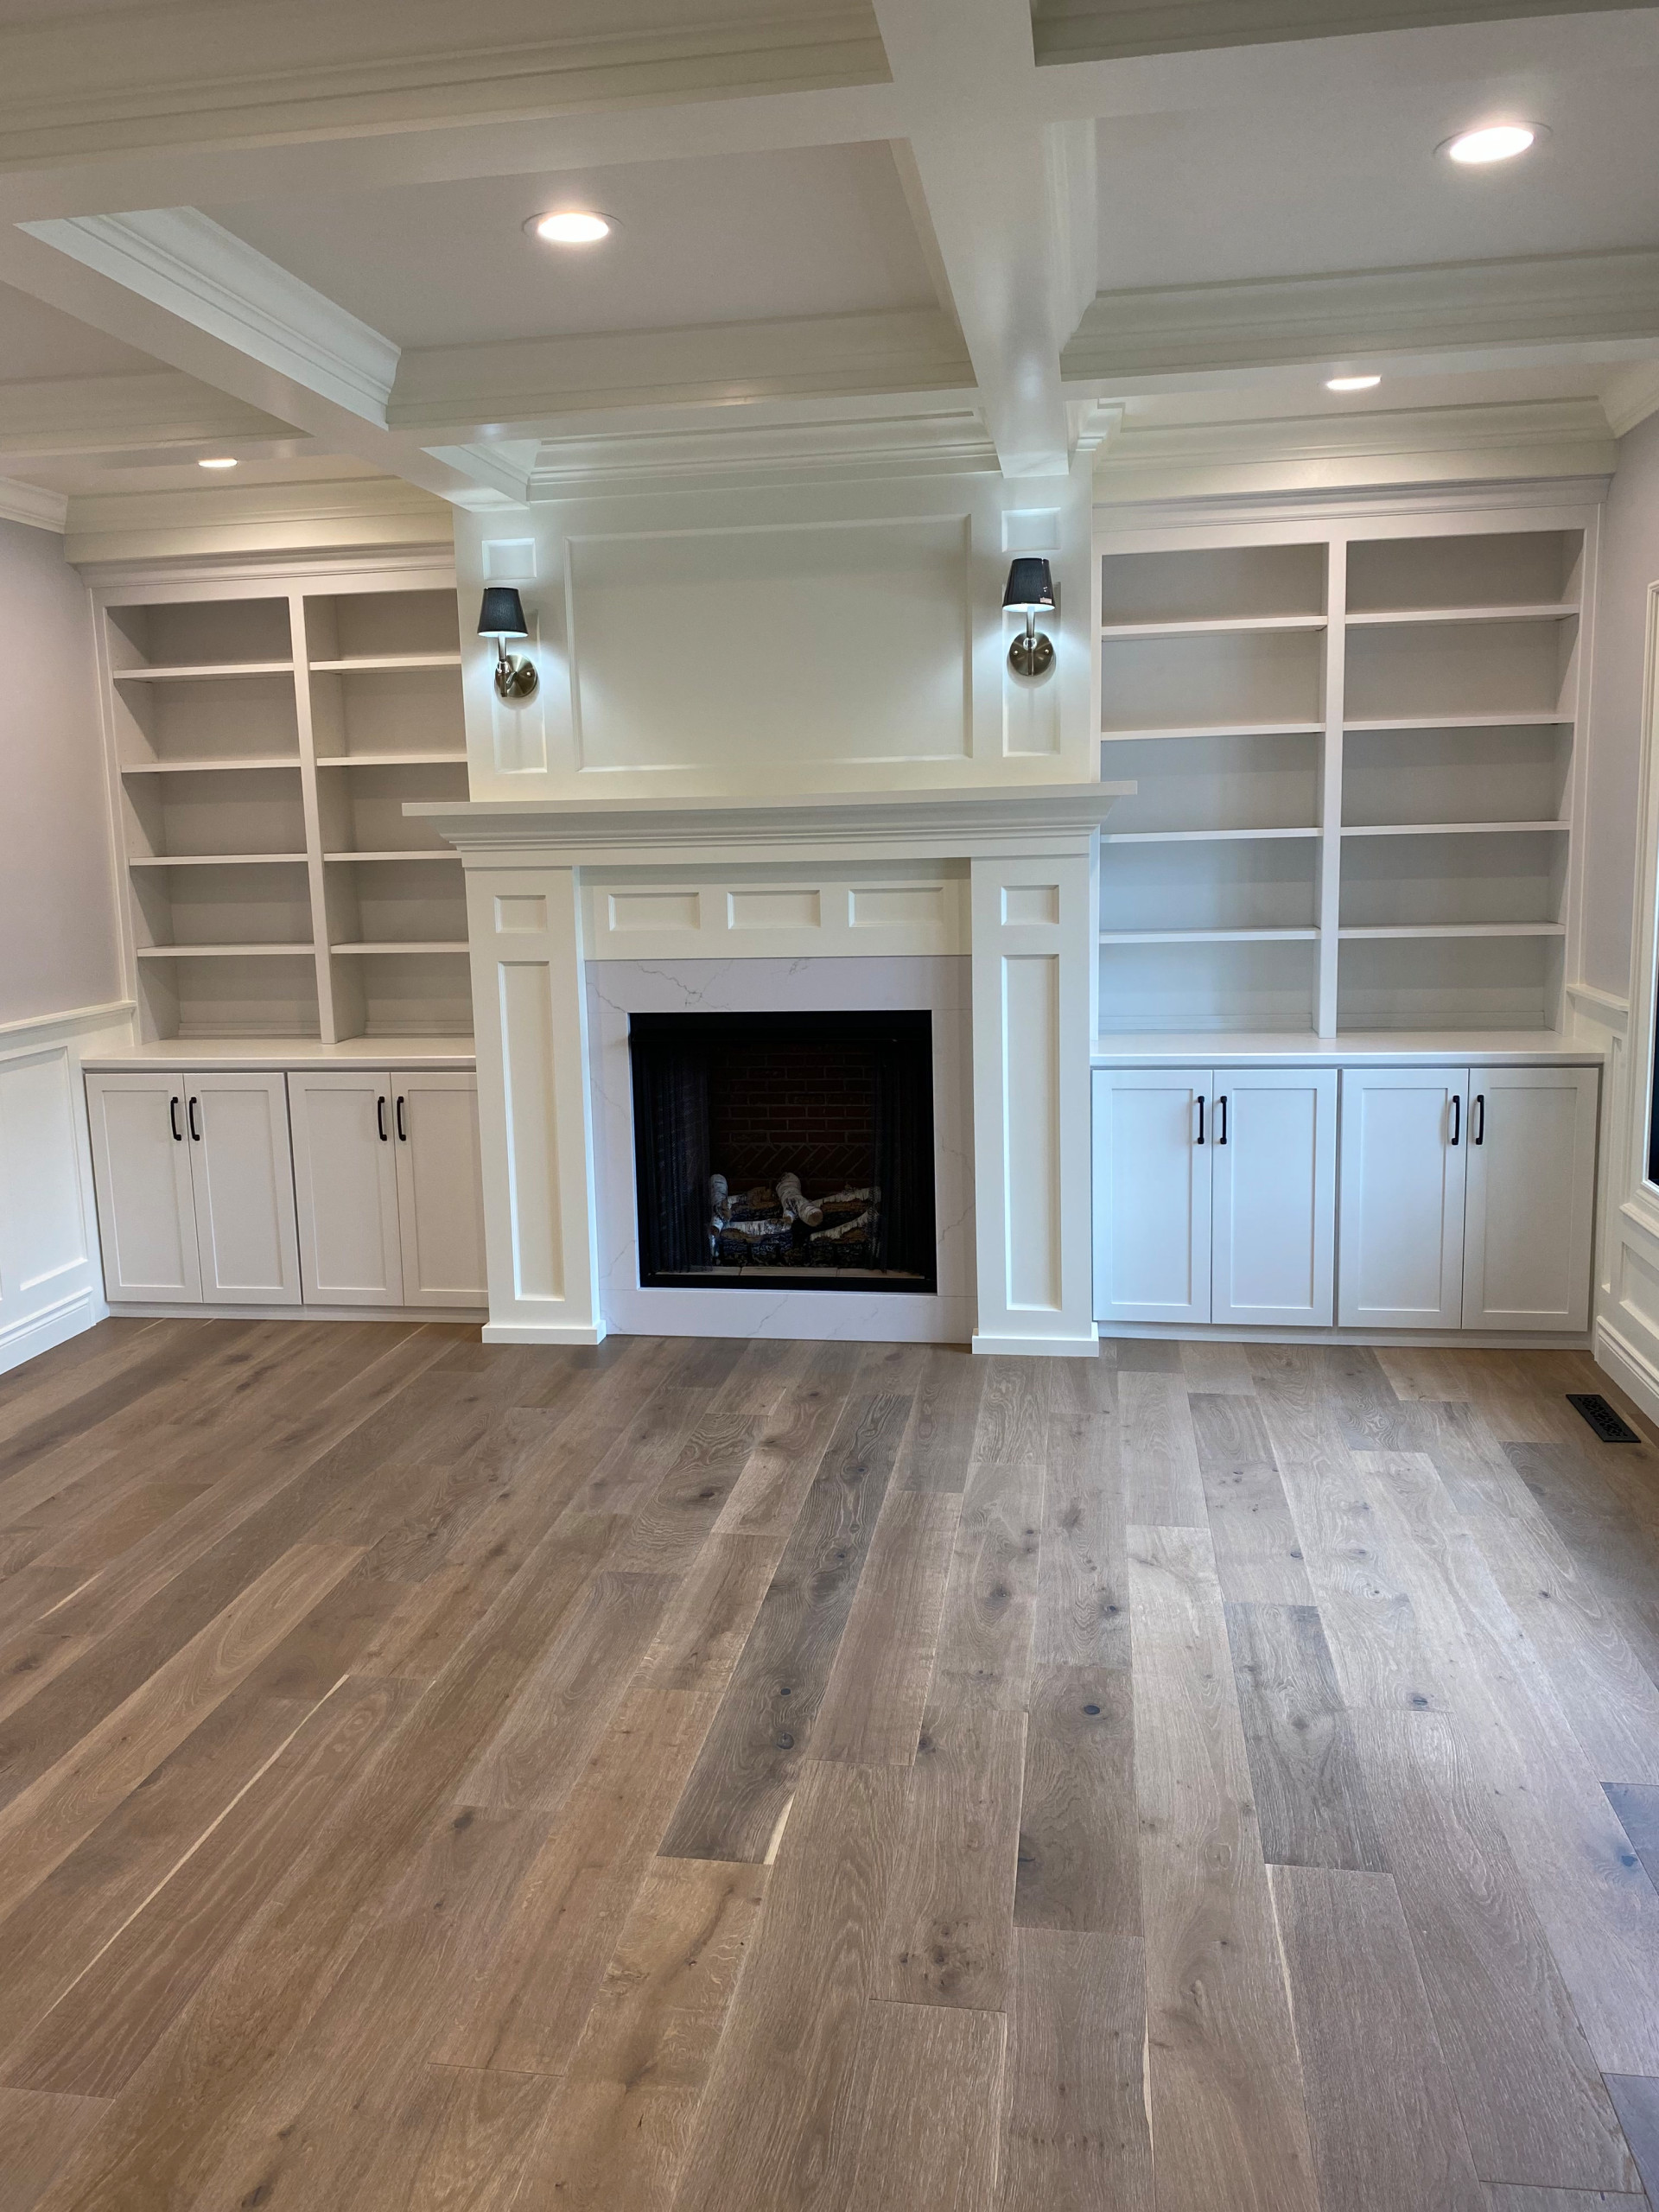 Home office with gas log fireplace, painted custom built-ins, painted custom fir